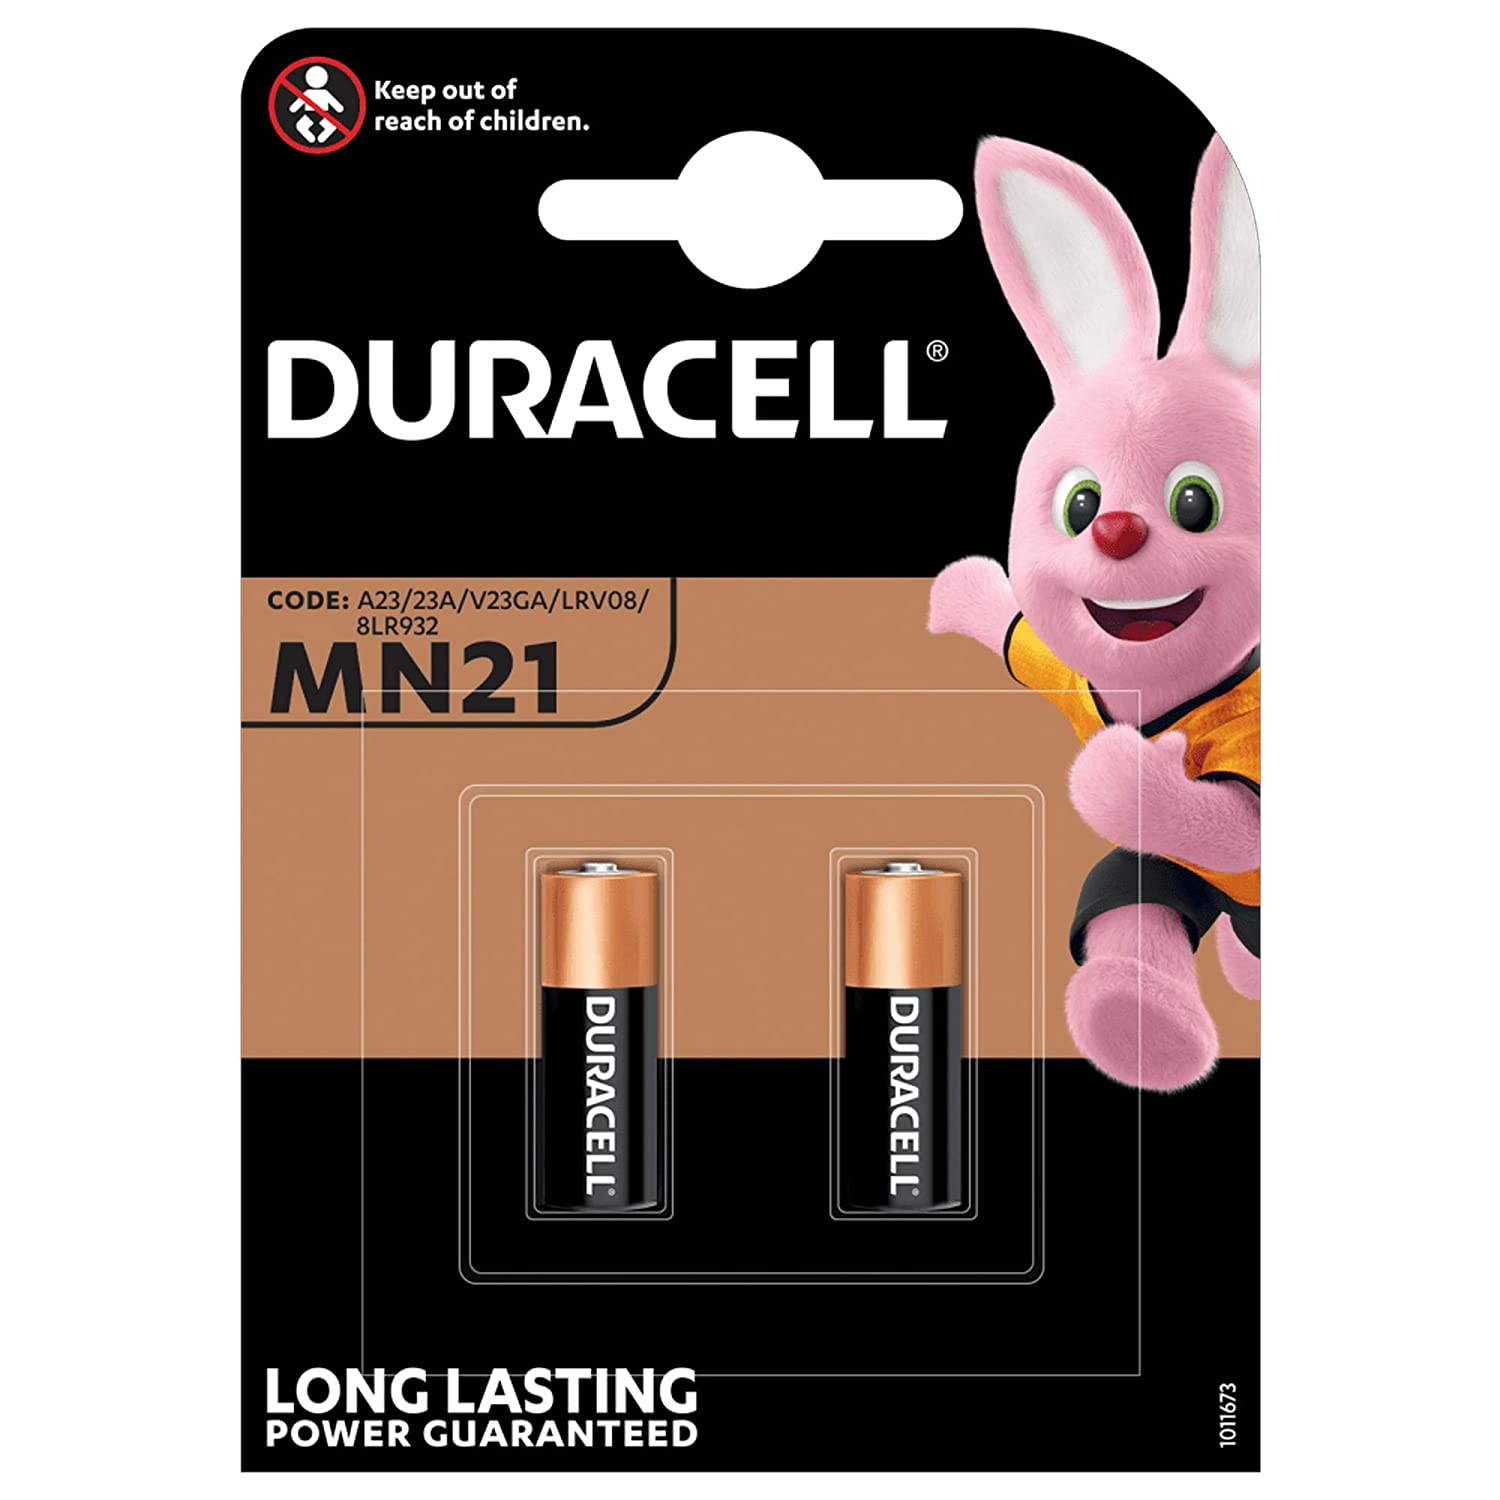 Duracell Specialty Alkaline MN21 Battery 12V - Pack of 2